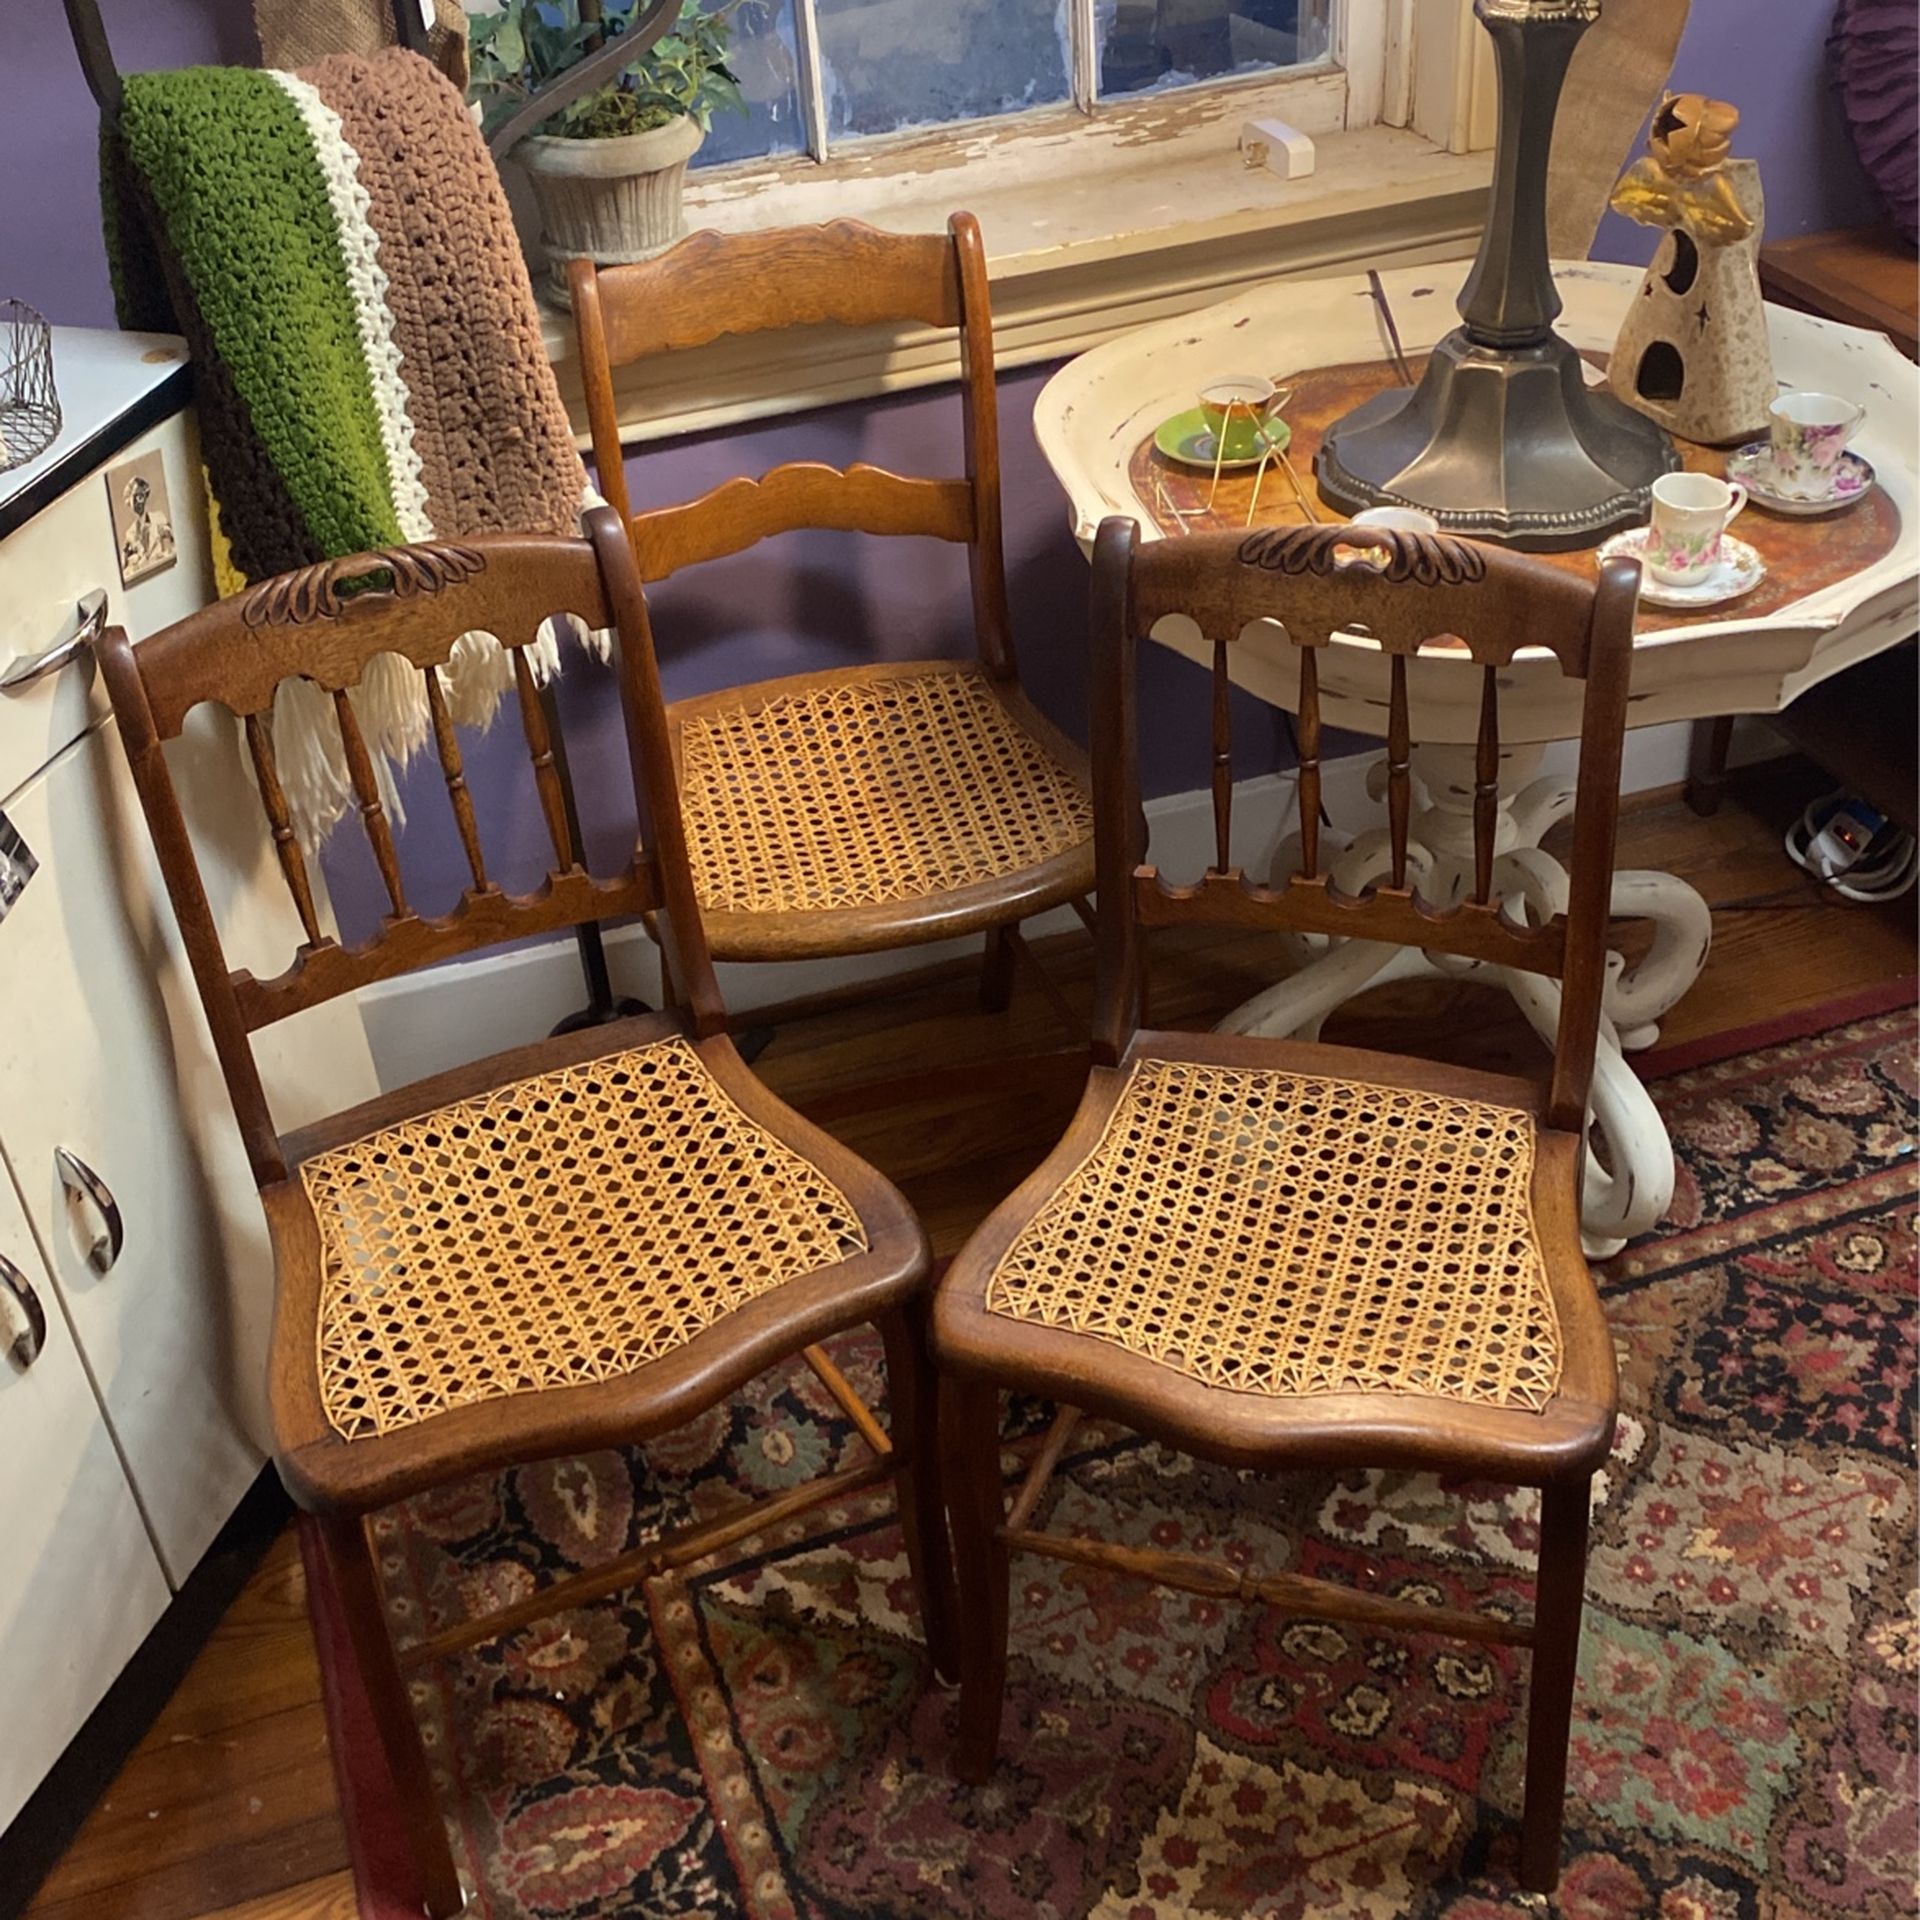 3 Vintage Wicker Chairs For $ 49.99